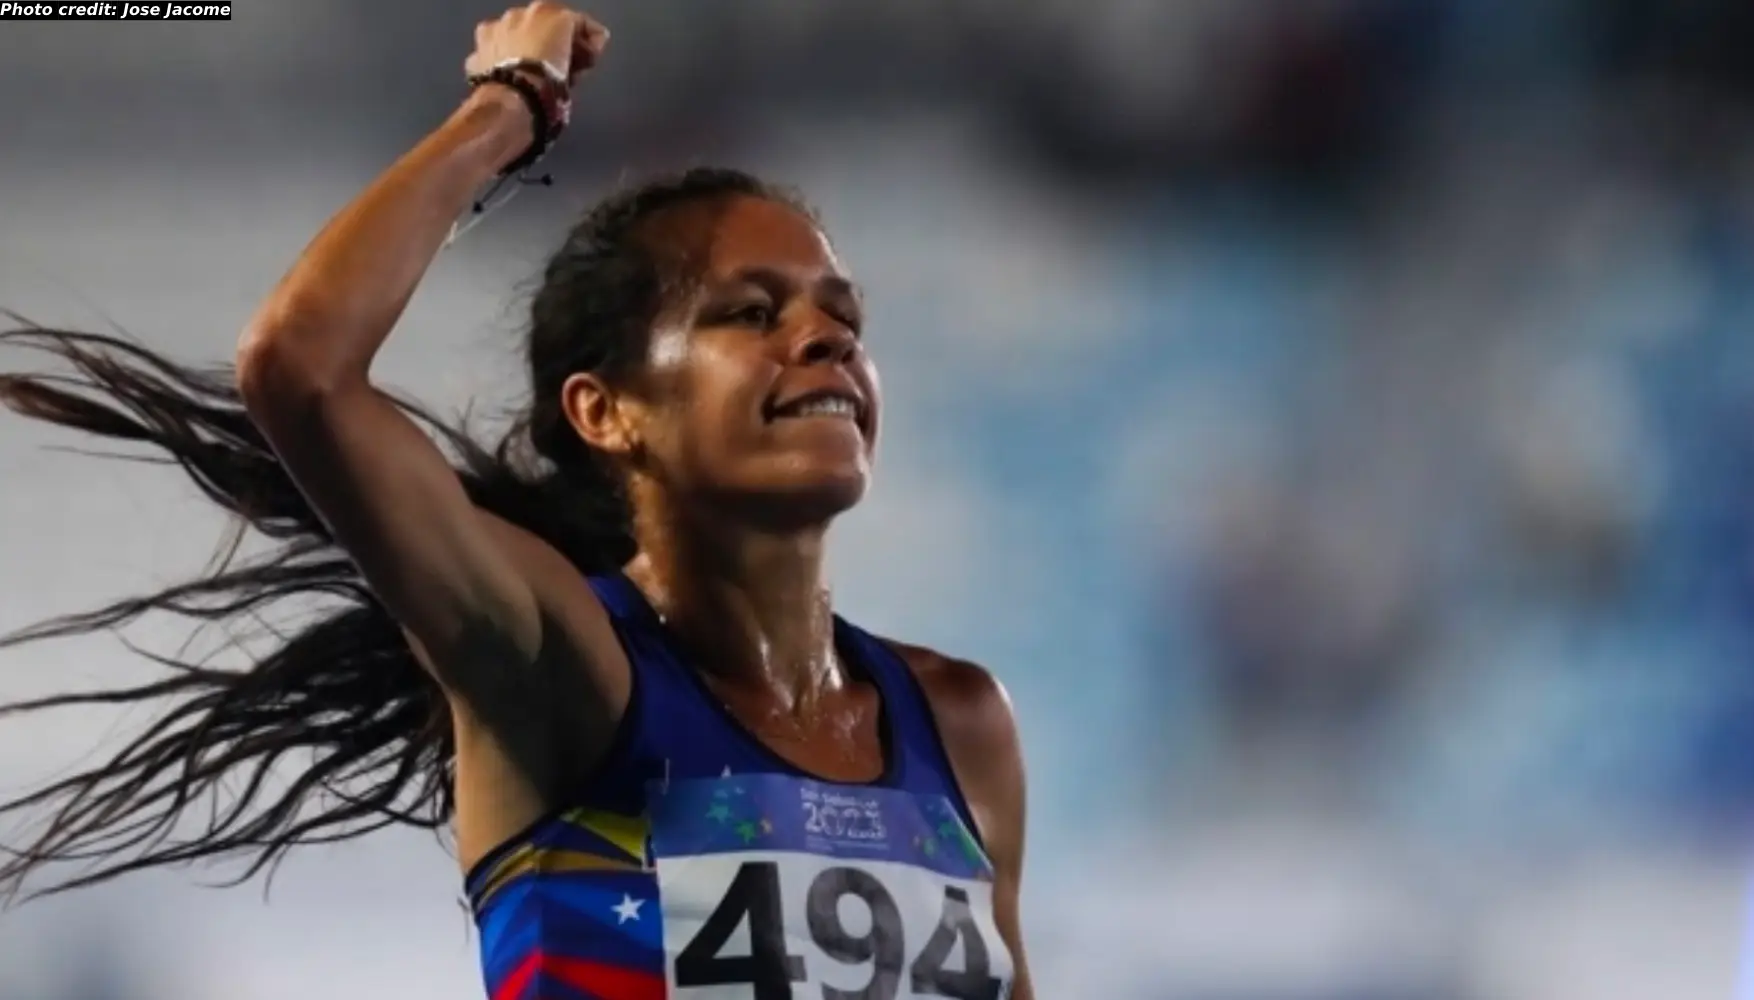 Joselyn Brea of Venezuela wins the women's 5000m at the CAC Games